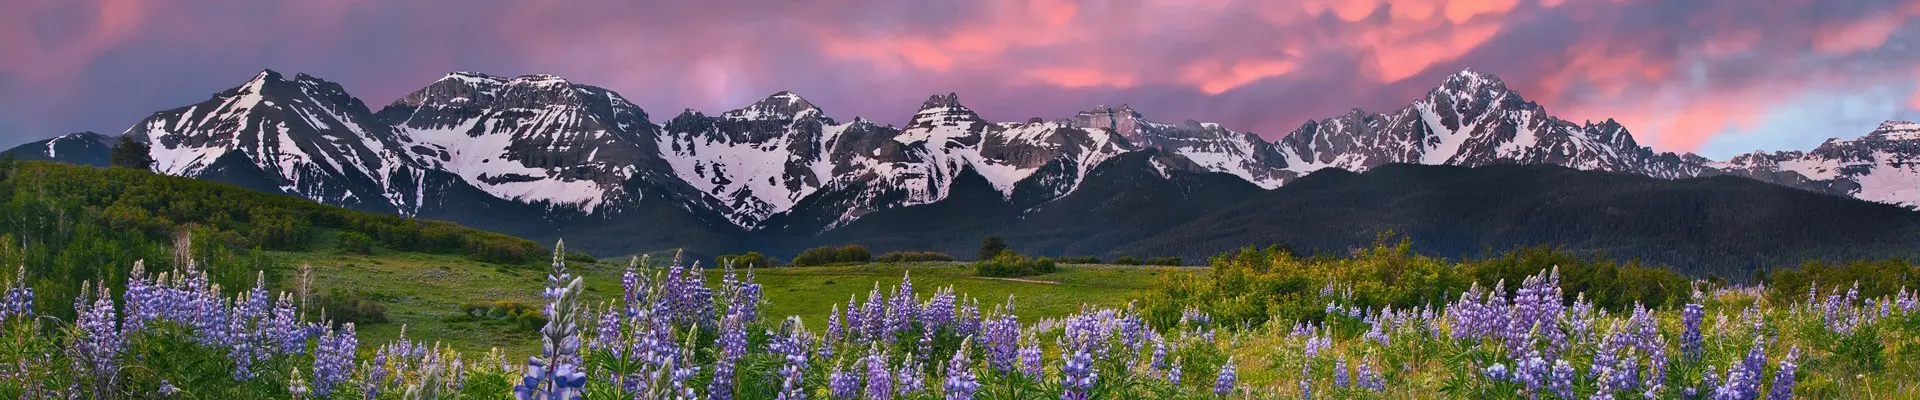 panoramic photo of snow capped colorado mountains with pink and purple clouds behind them, and lilac flowers in the green meadow in the foreground